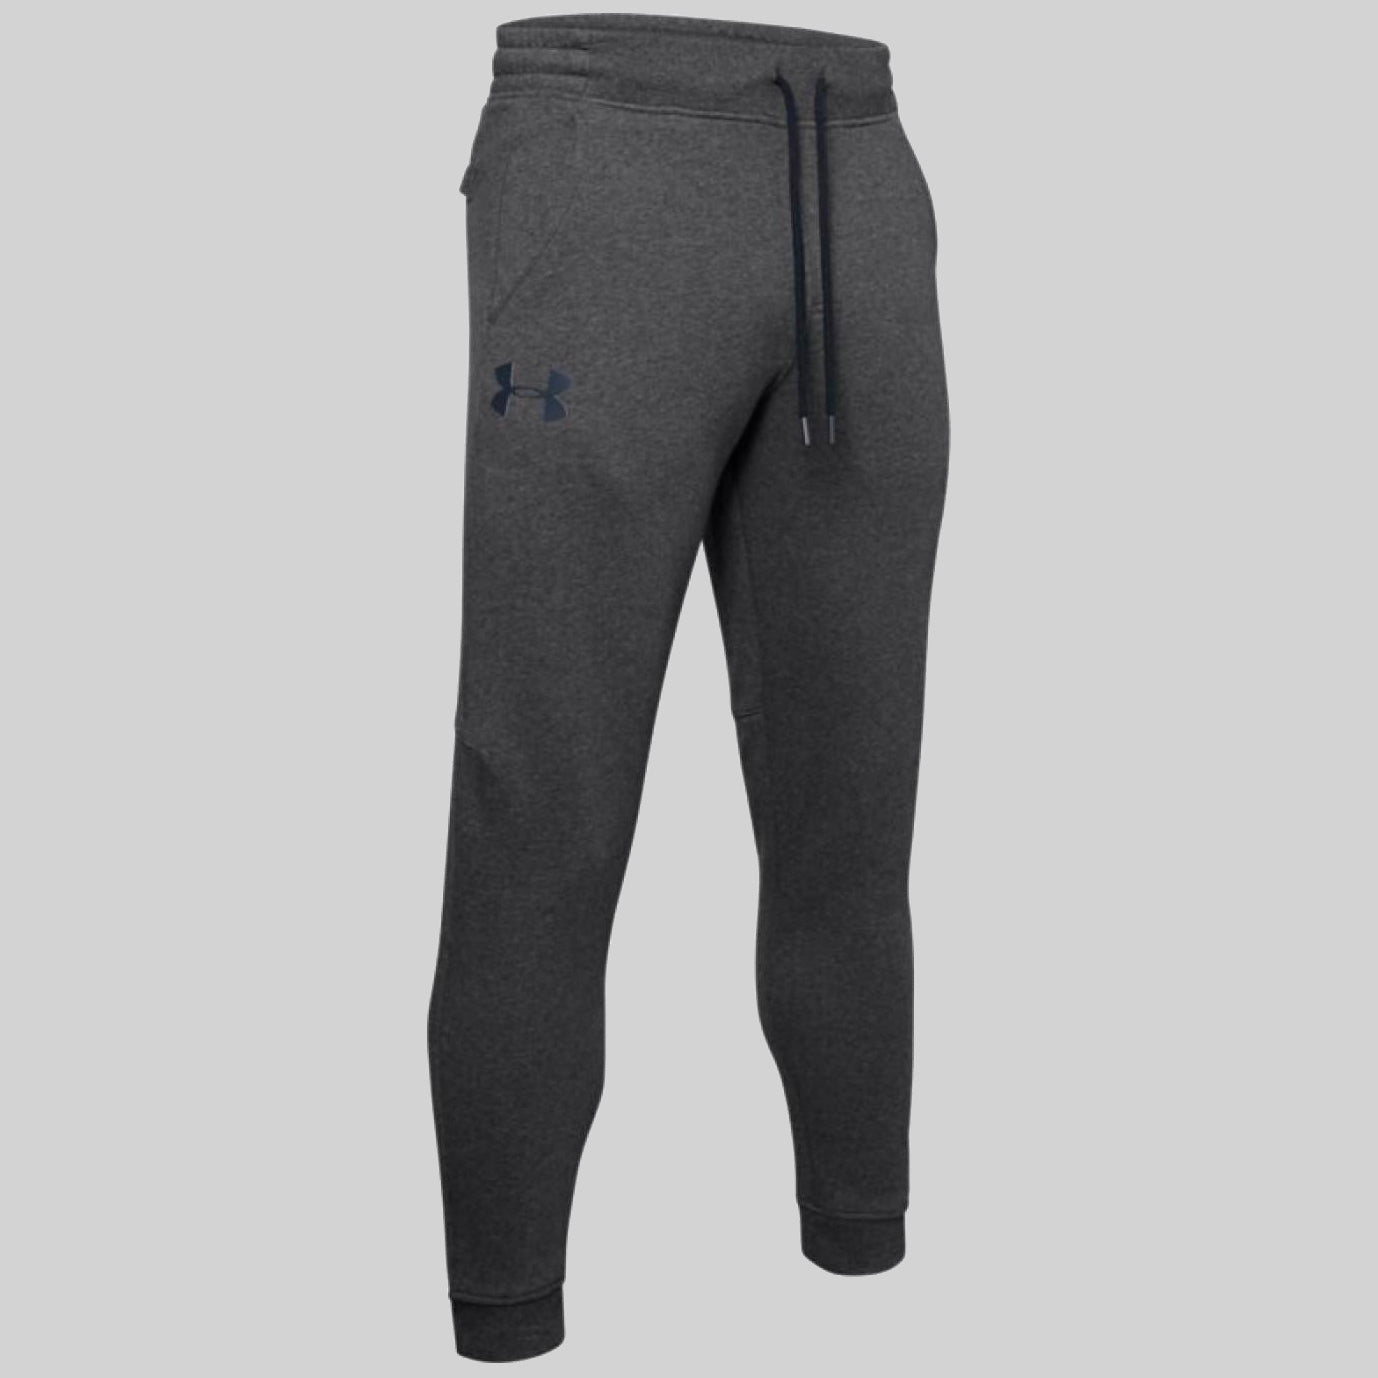 Under Armour Fleece Fitted Sweatpants